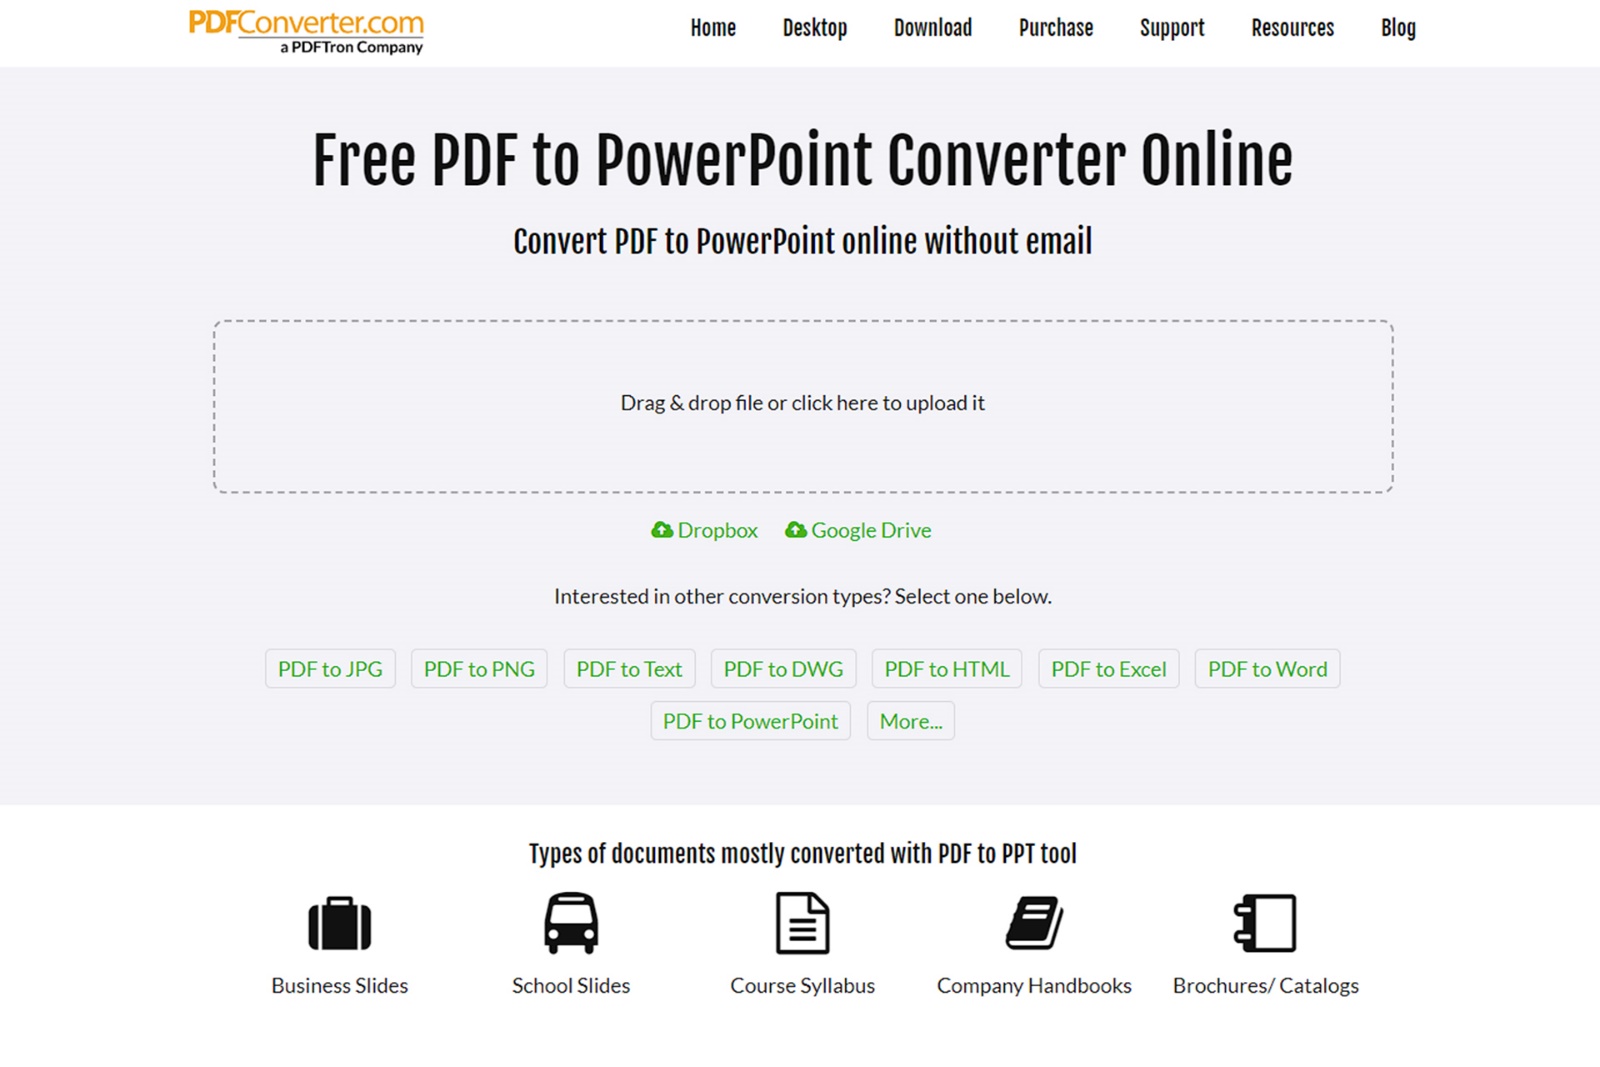 Select the file to convert to PPT format